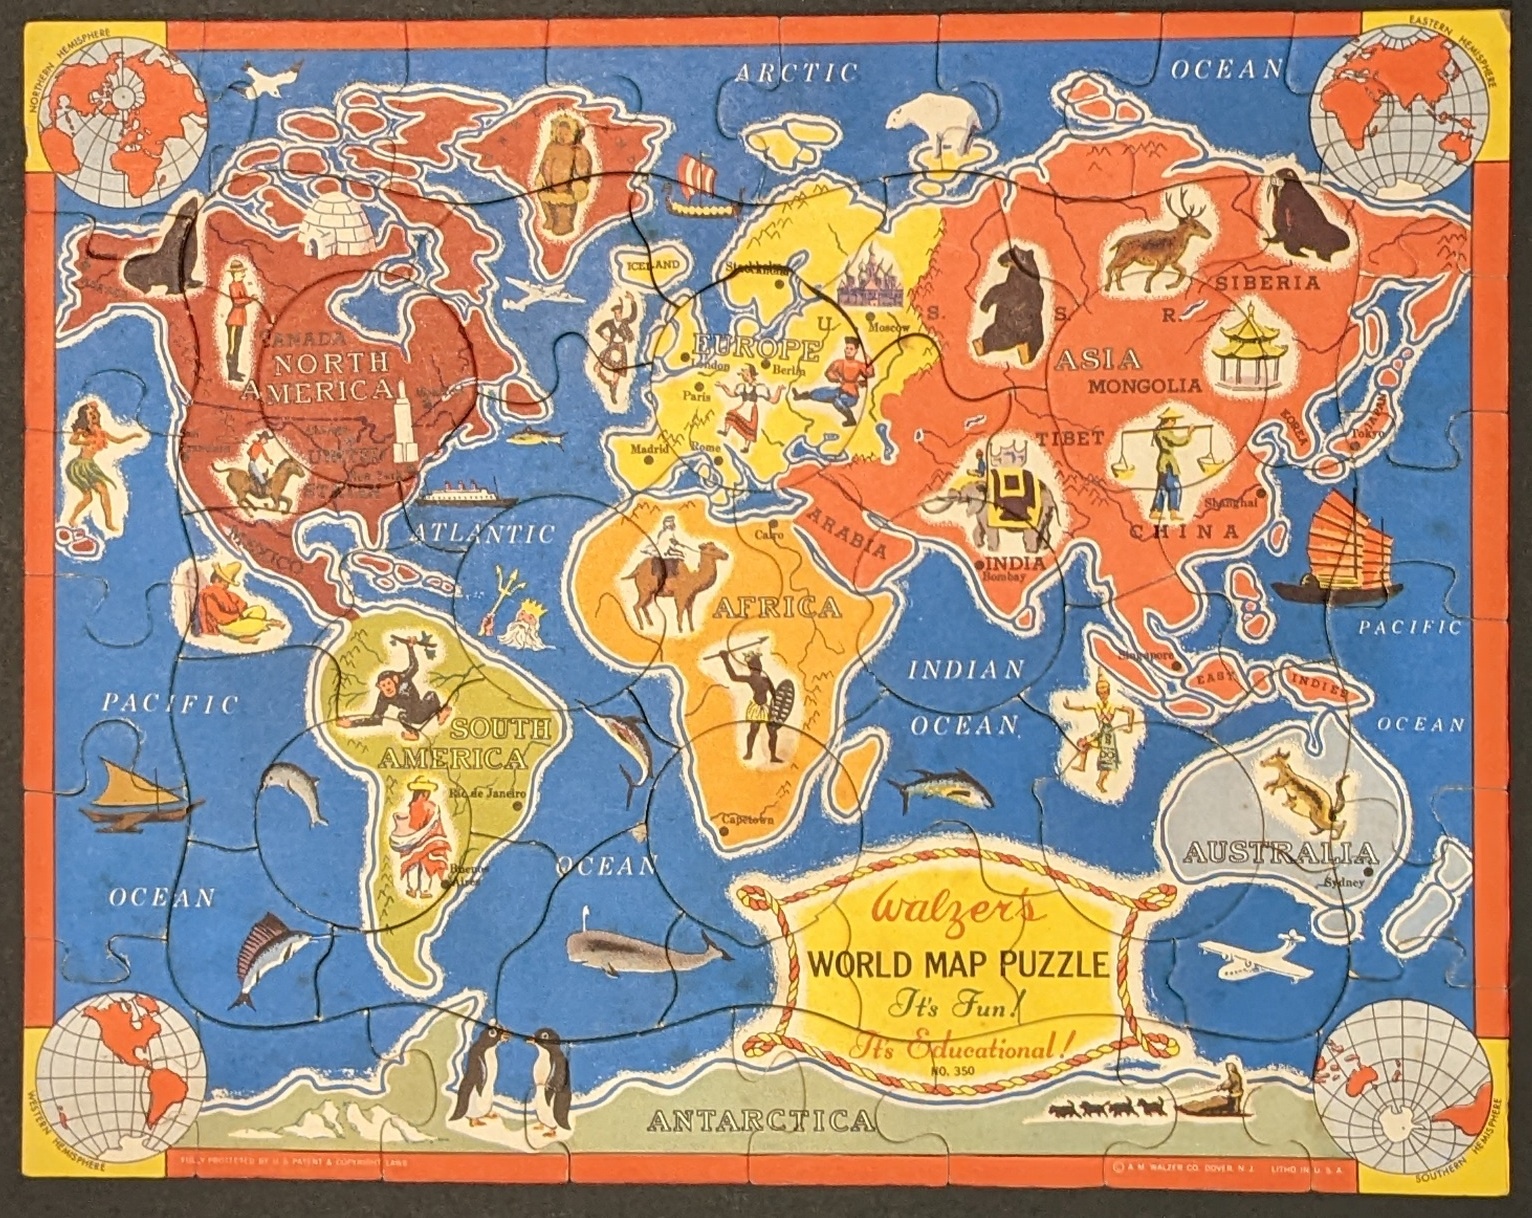 Walzer’s World Map Puzzle | Curtis Wright Maps